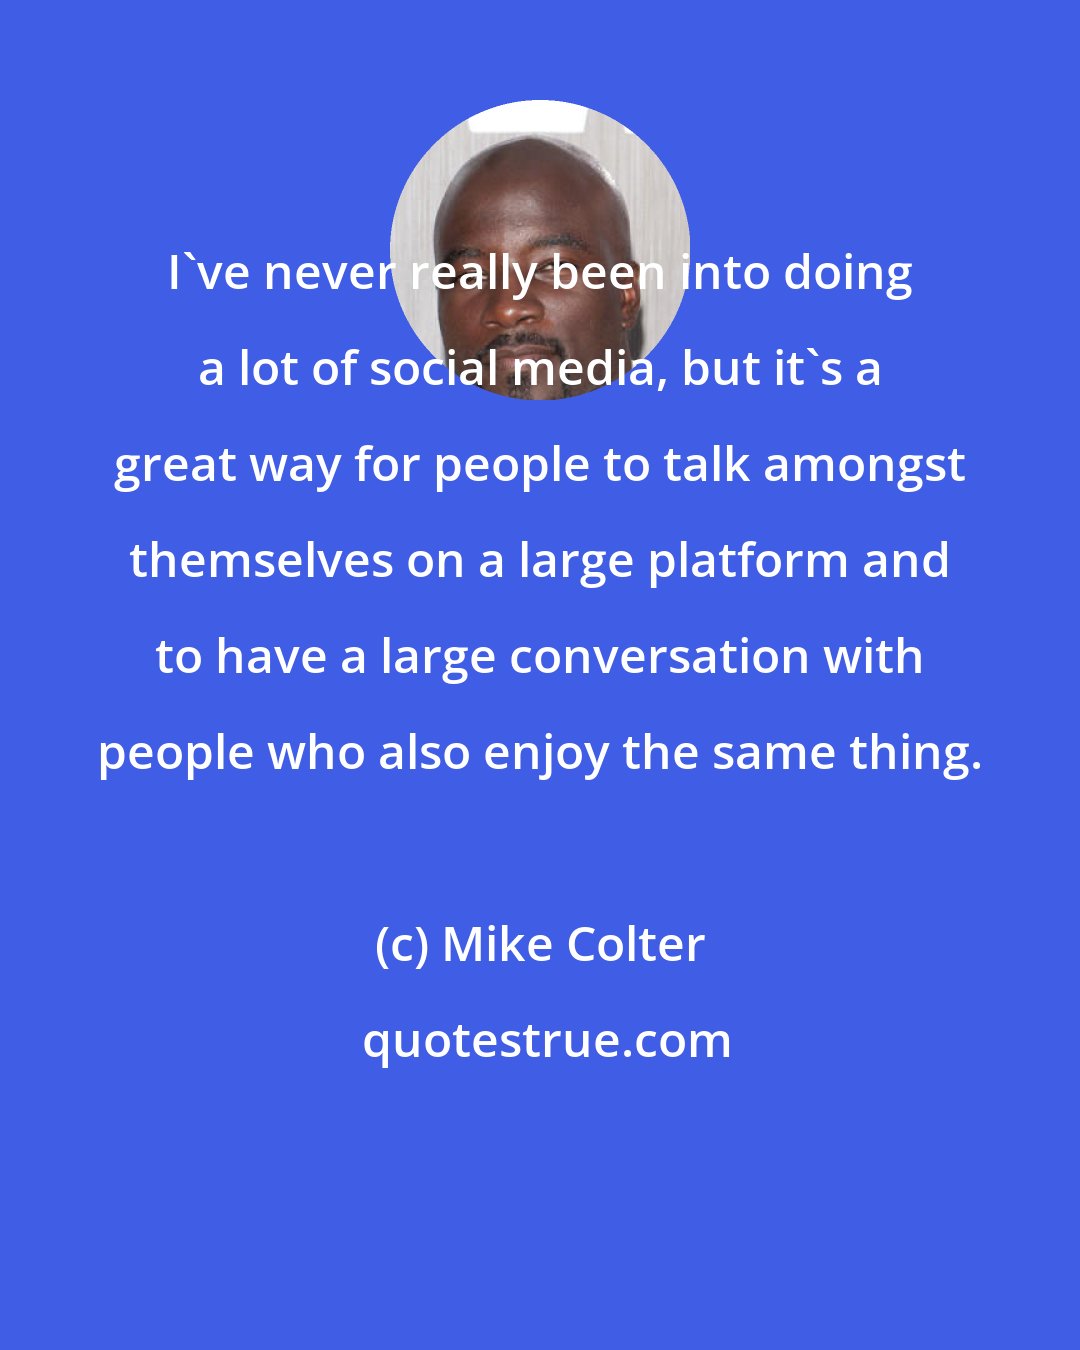 Mike Colter: I've never really been into doing a lot of social media, but it's a great way for people to talk amongst themselves on a large platform and to have a large conversation with people who also enjoy the same thing.